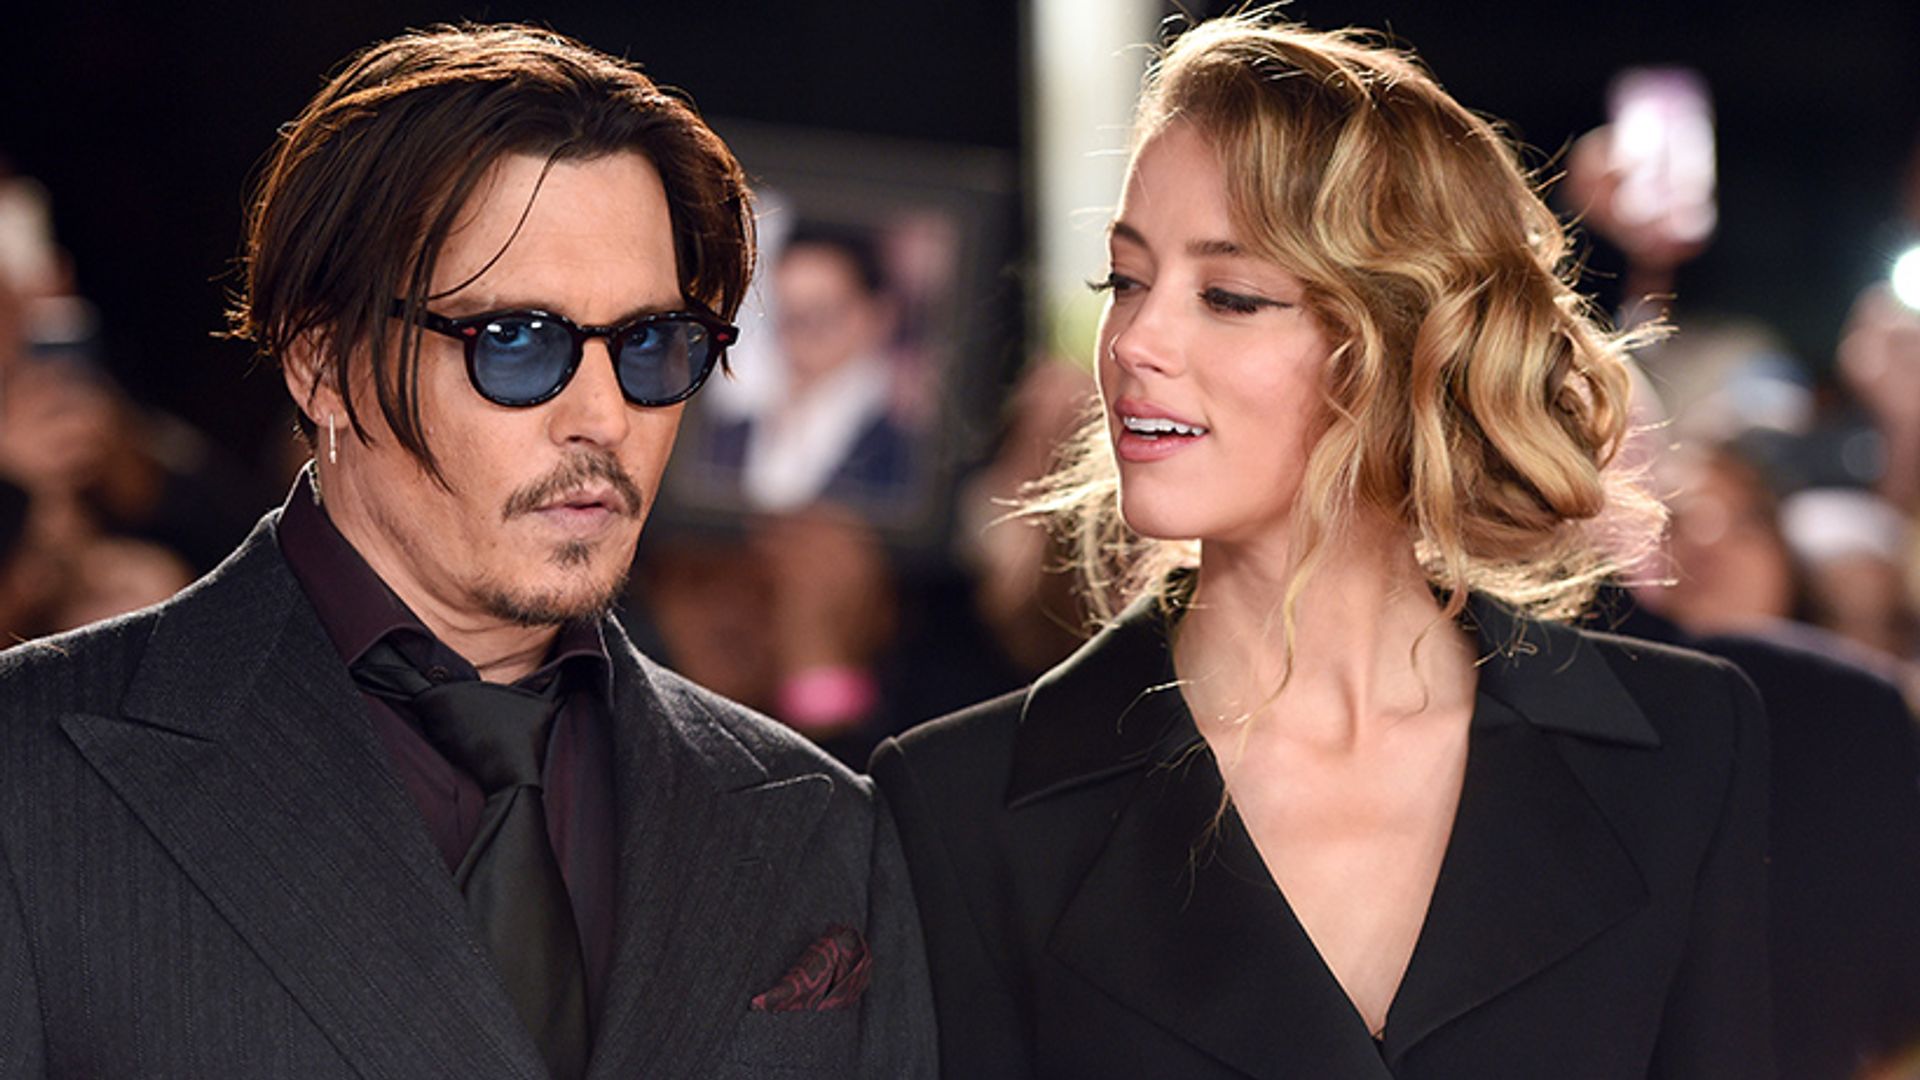 Amber Heard and Johnny Depp's divorce has been finalised